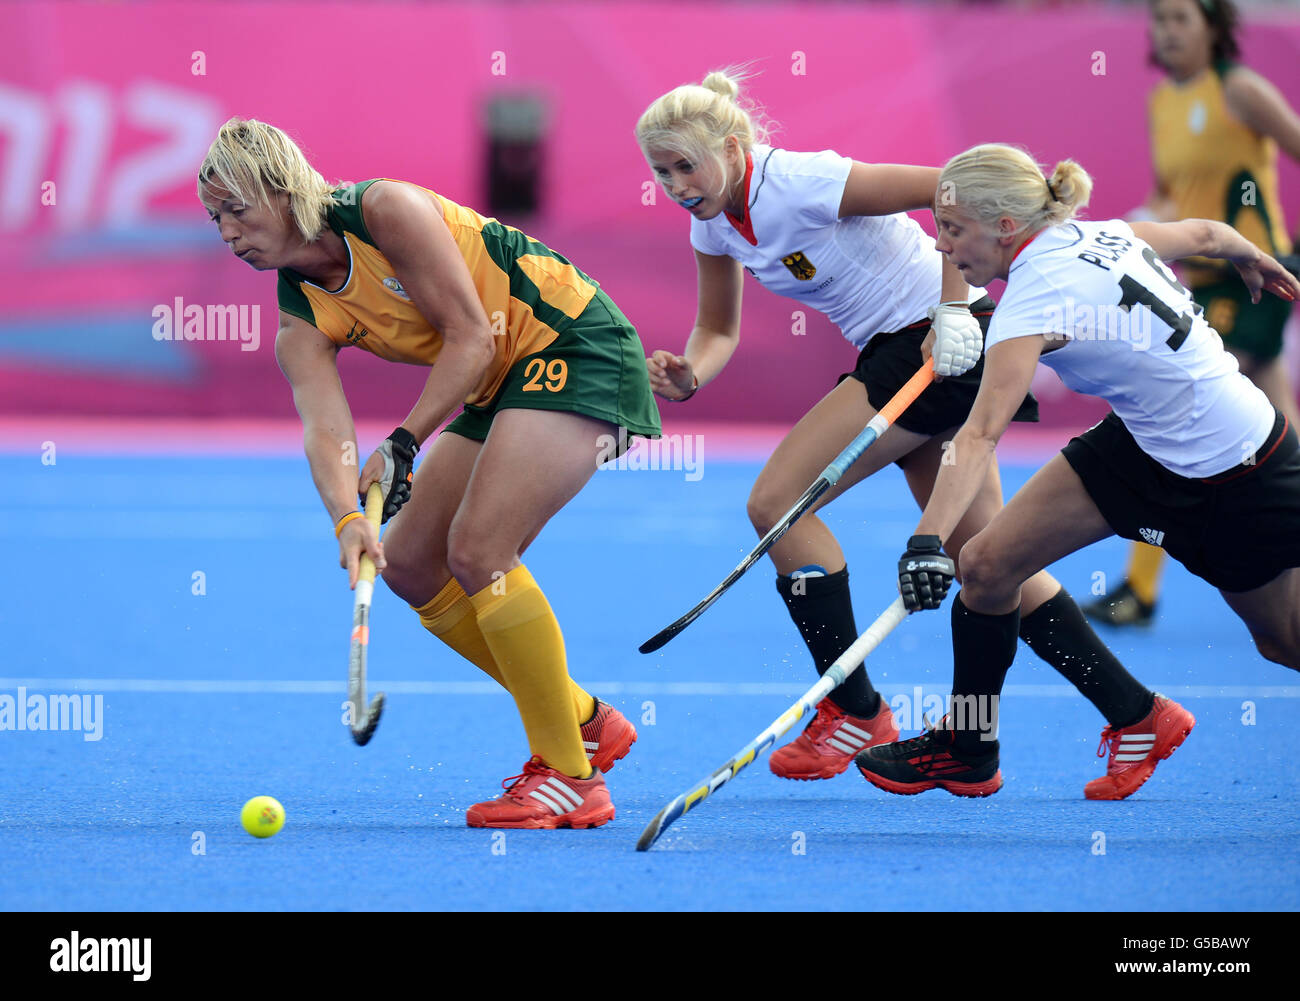 London Olympic Games - Day 6. South Africa's Tarryn Bright and Germany's Jennifer Plass (right) in action in action during their Pool B match at The Riverbank Arena Stock Photo